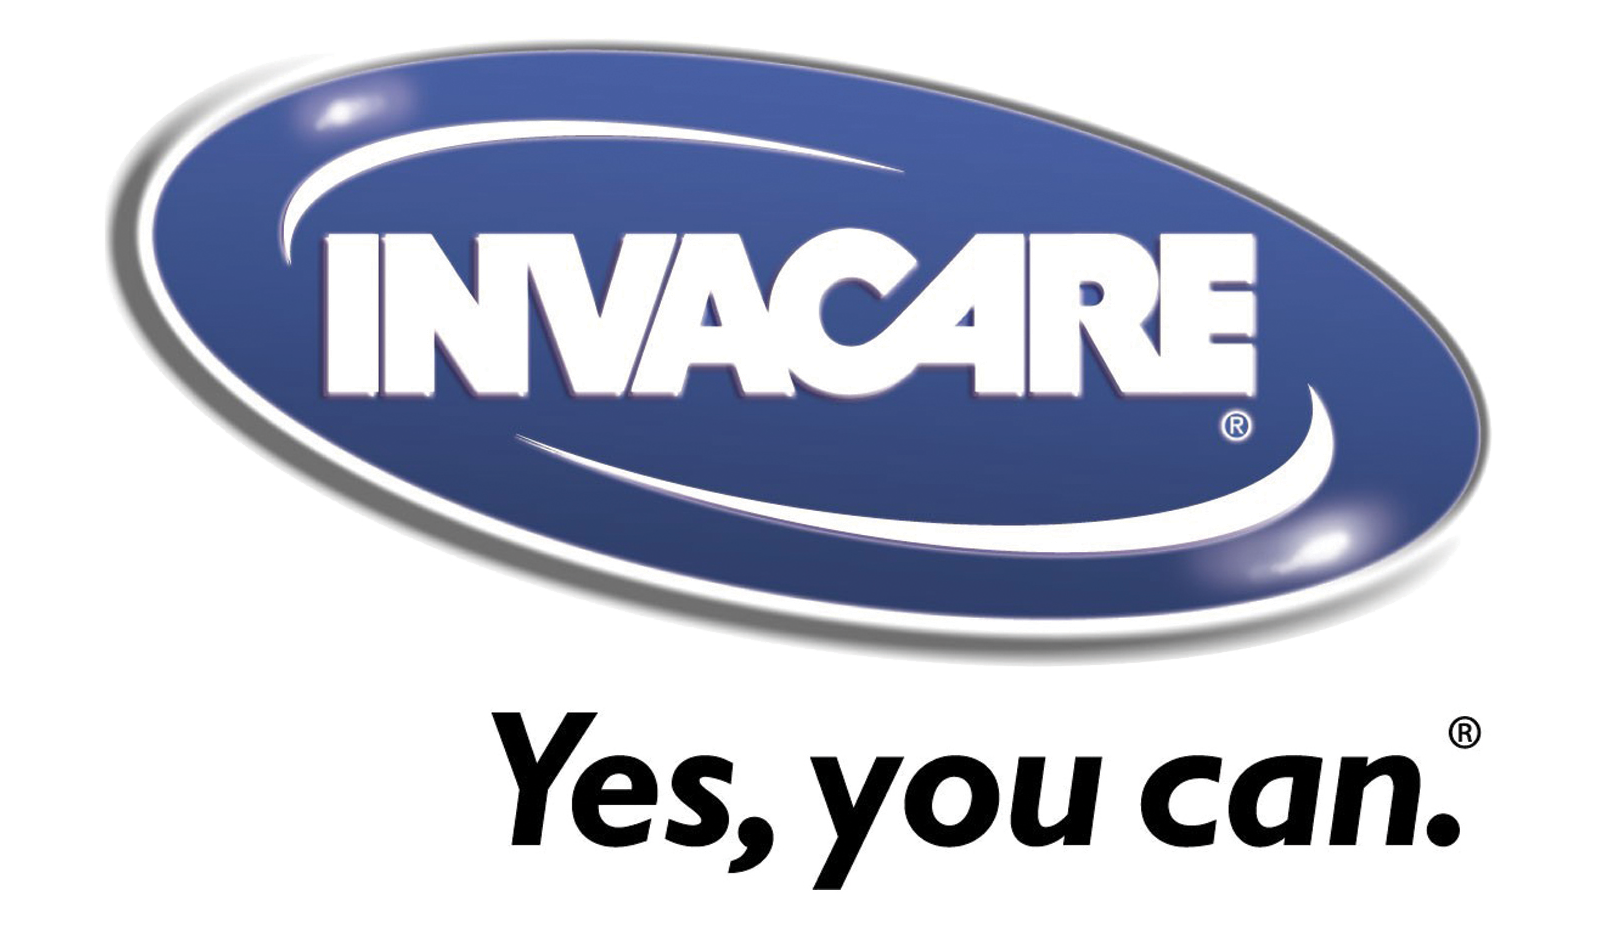 Invacare logo, yes you can tagline